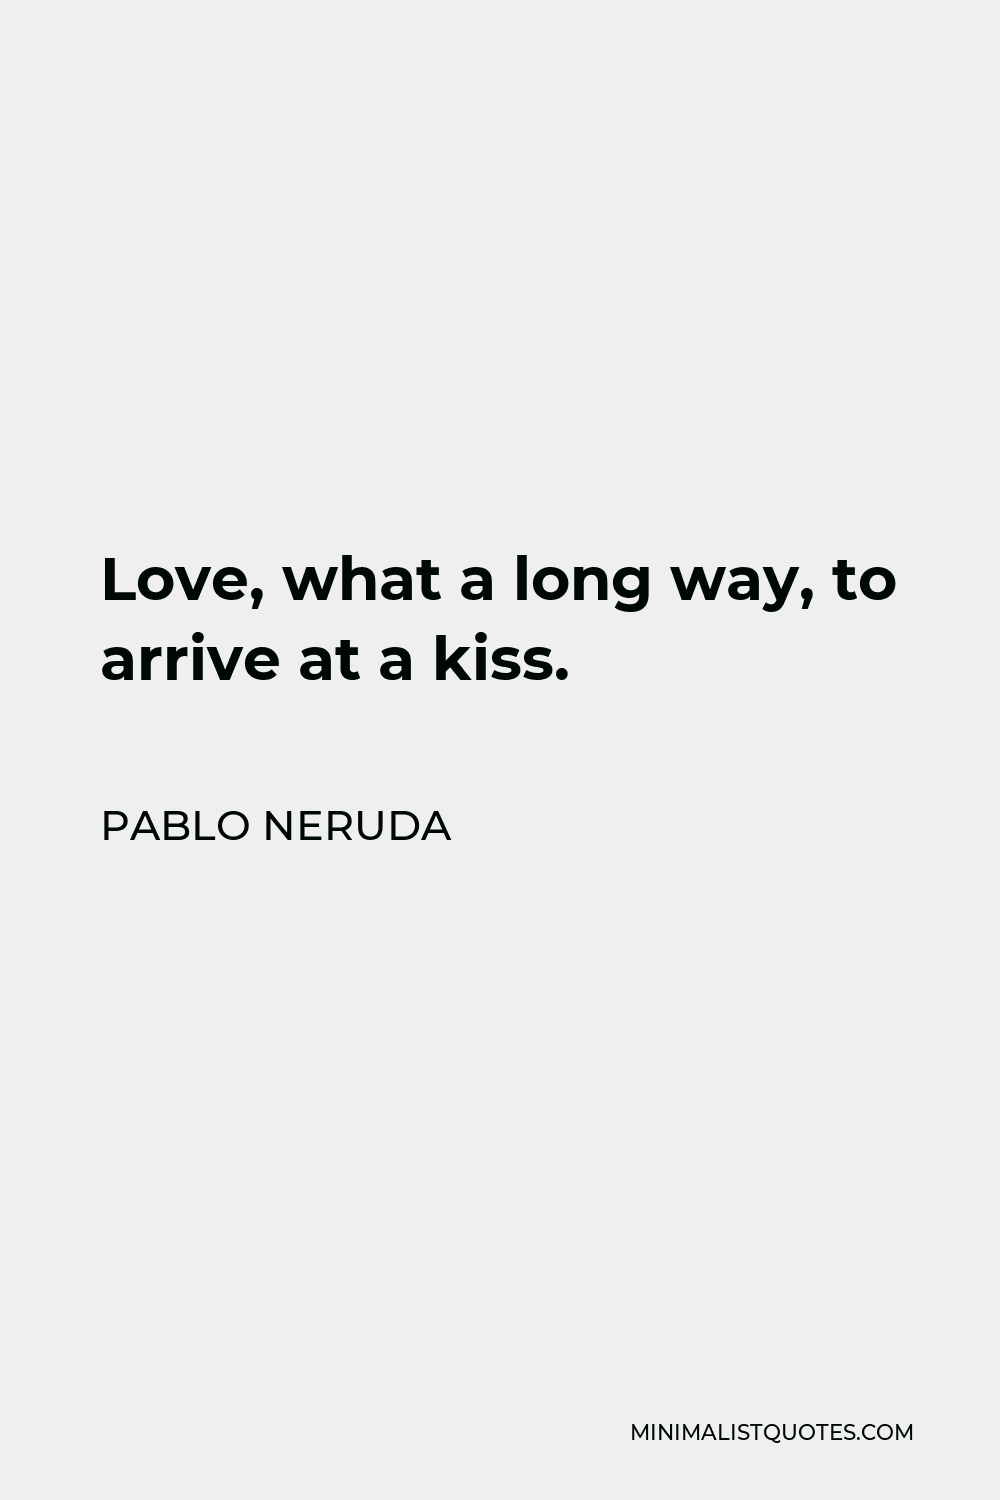 Pablo Neruda Quote - Love, what a long way, to arrive at a kiss.